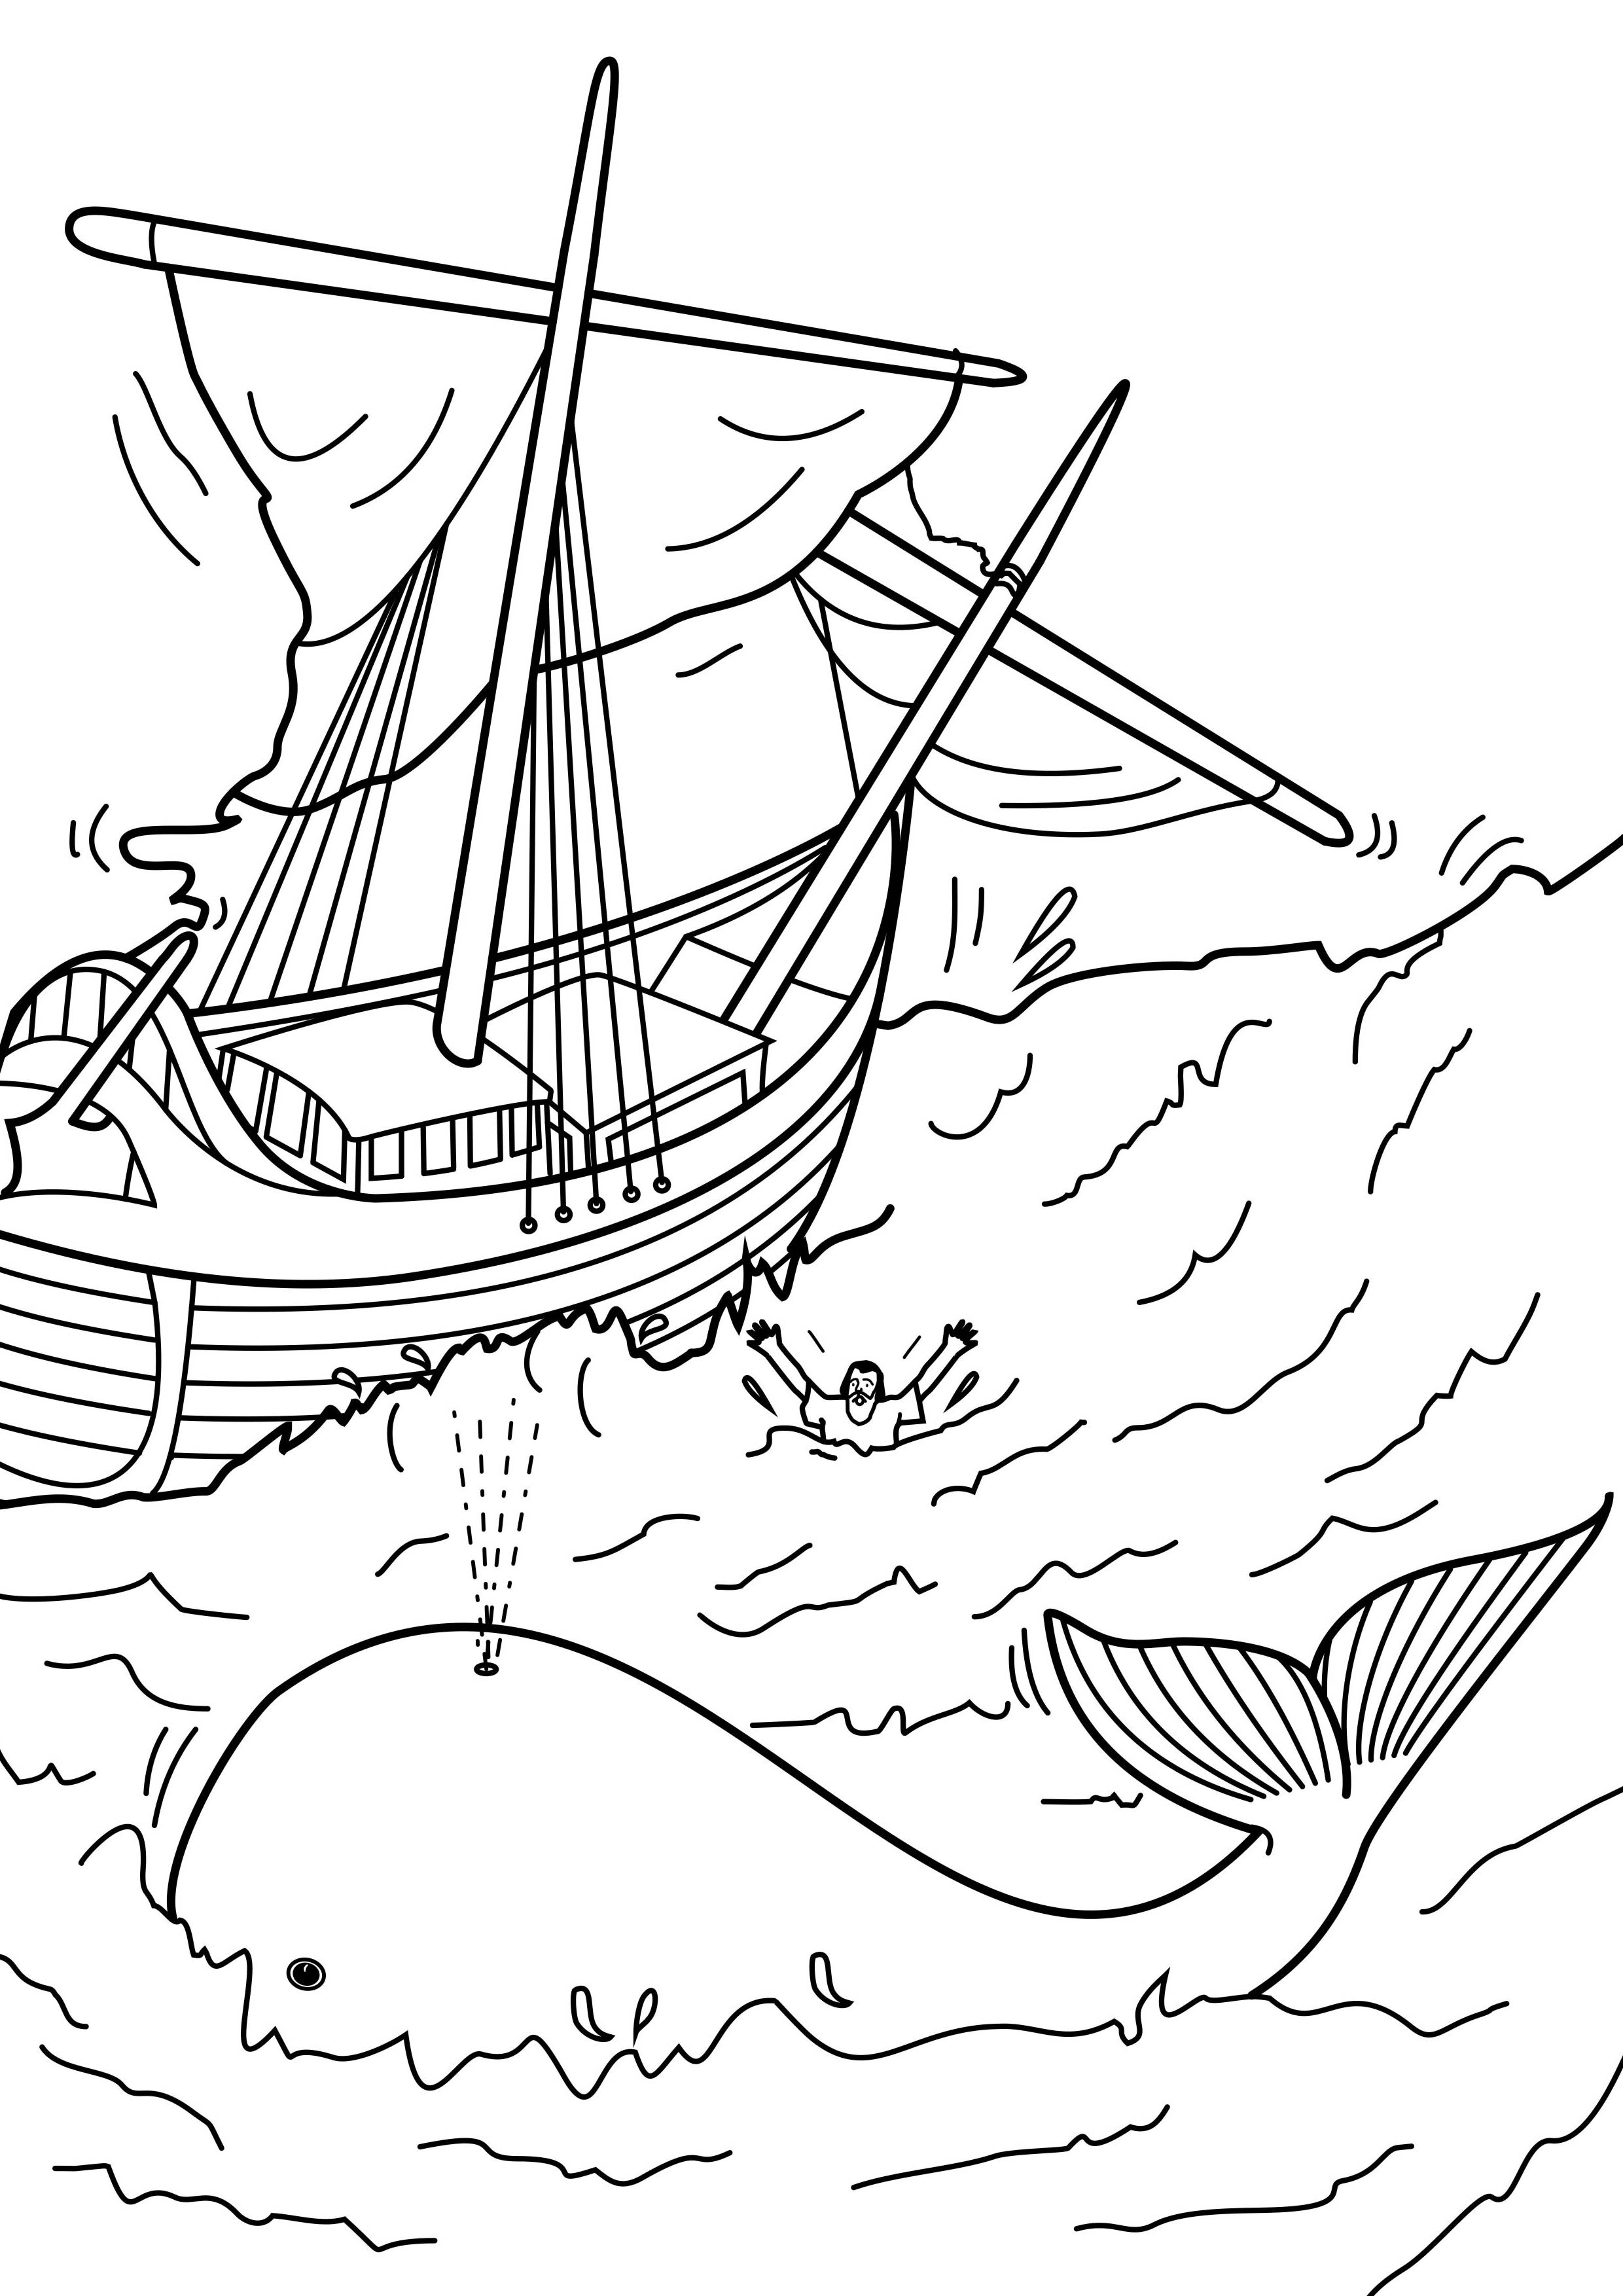 jonah-printable-coloring-pages-printable-word-searches